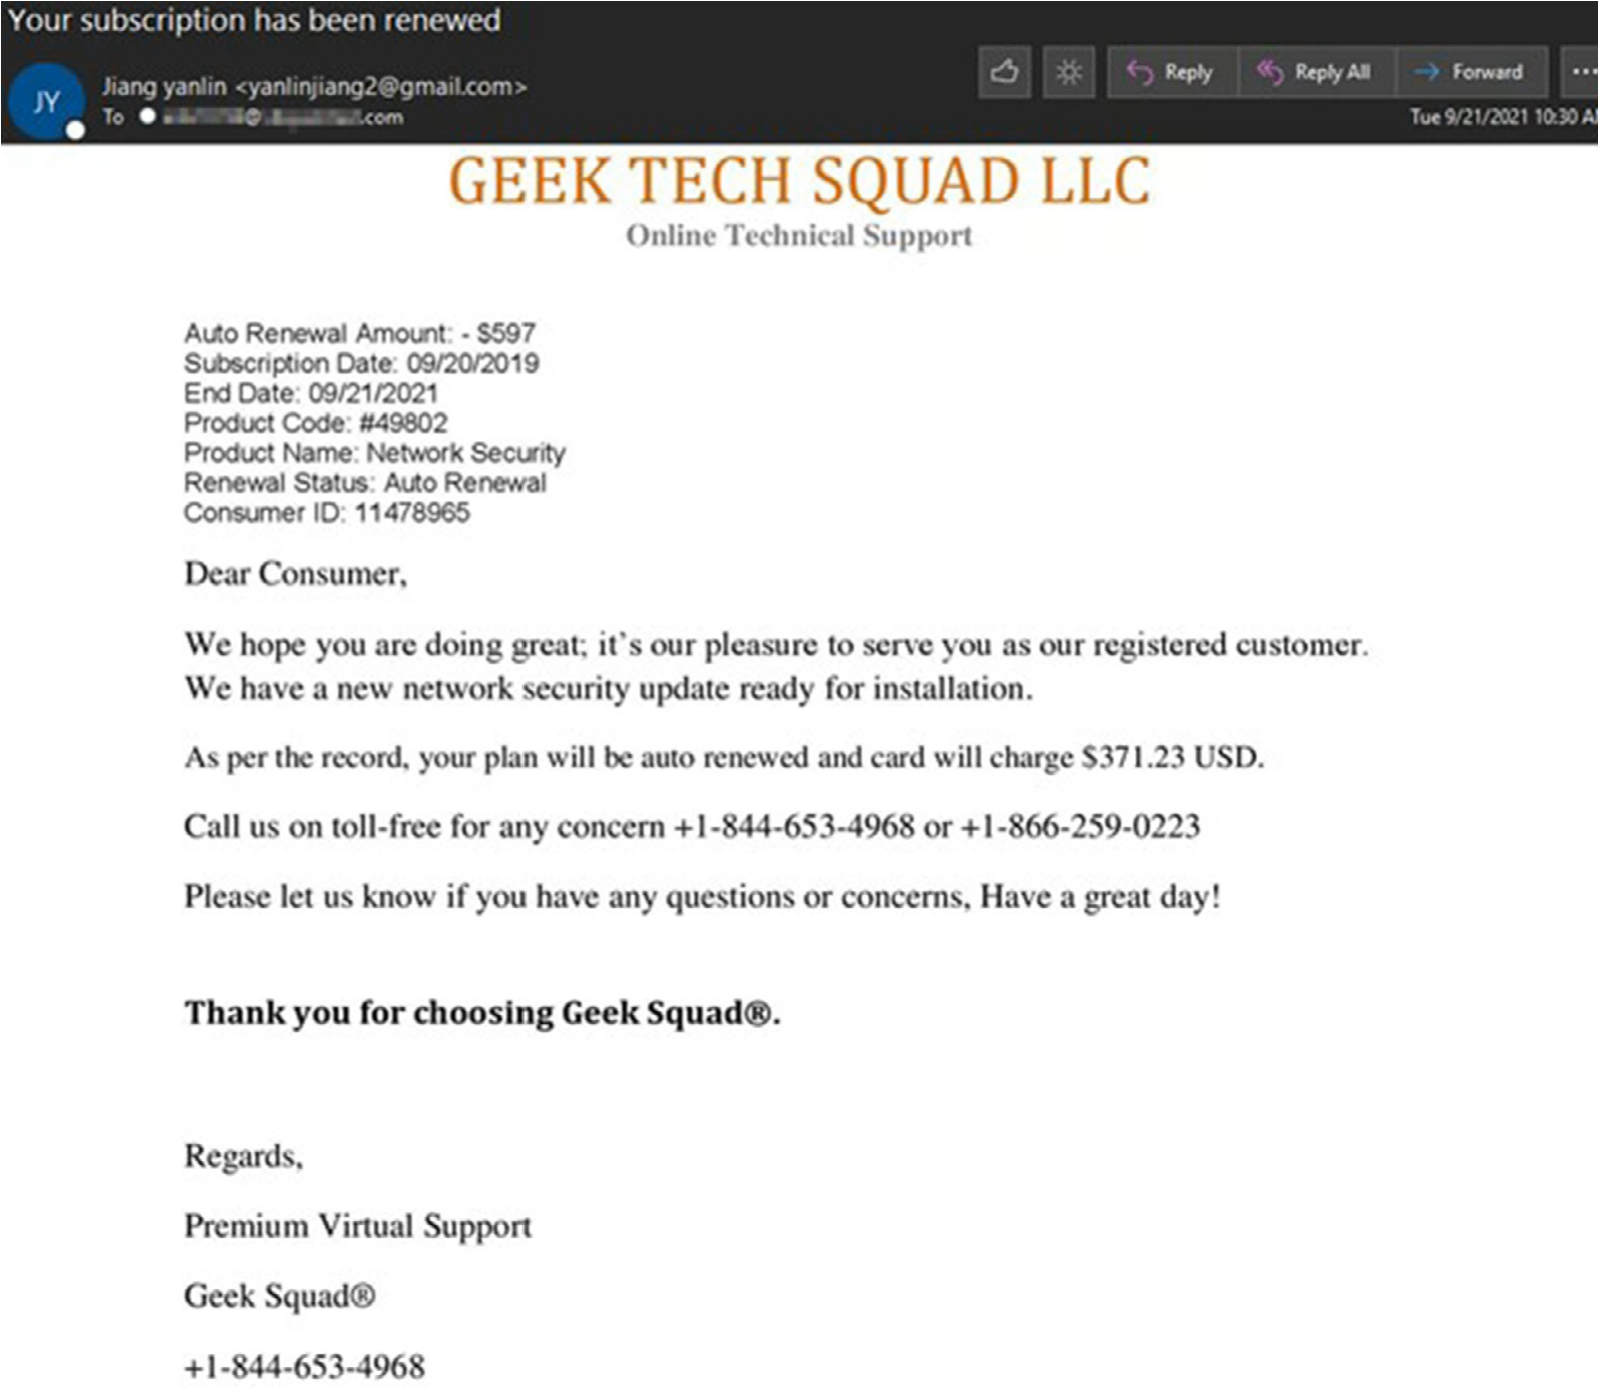 Geek Tech Squad email